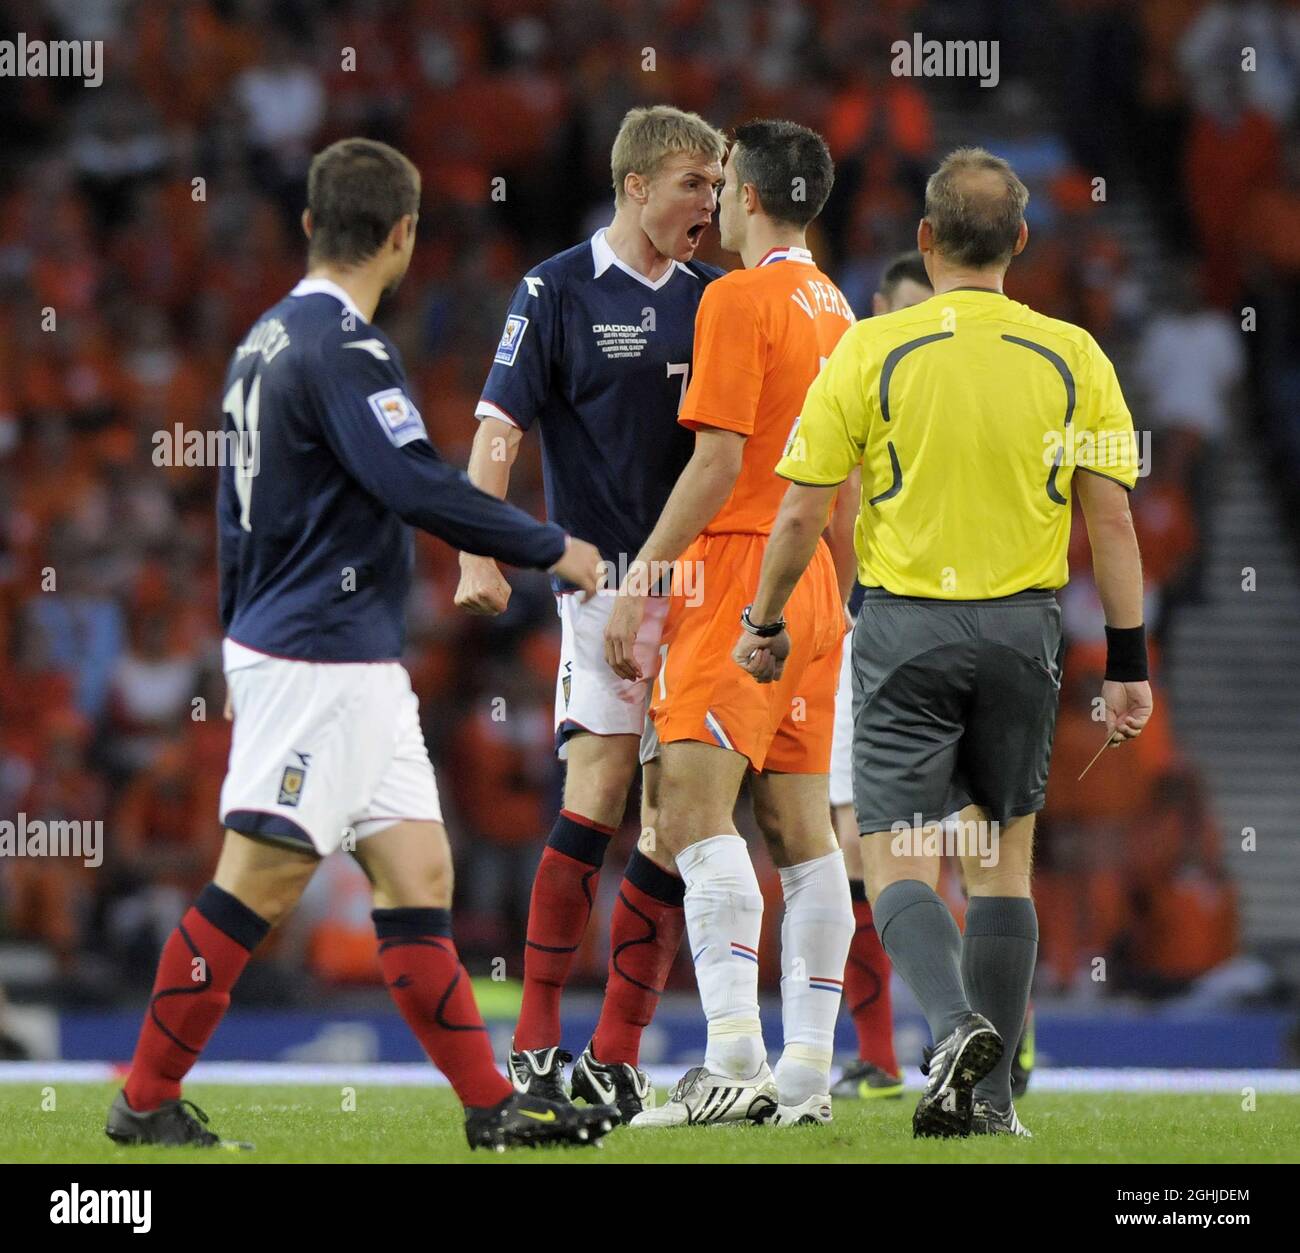 Scotland's Darren Fletcher squares up to Holland's Robin van Persie after a foul during the World Cup European Qualifier match at Hampden Park, Glasgow. Stock Photo